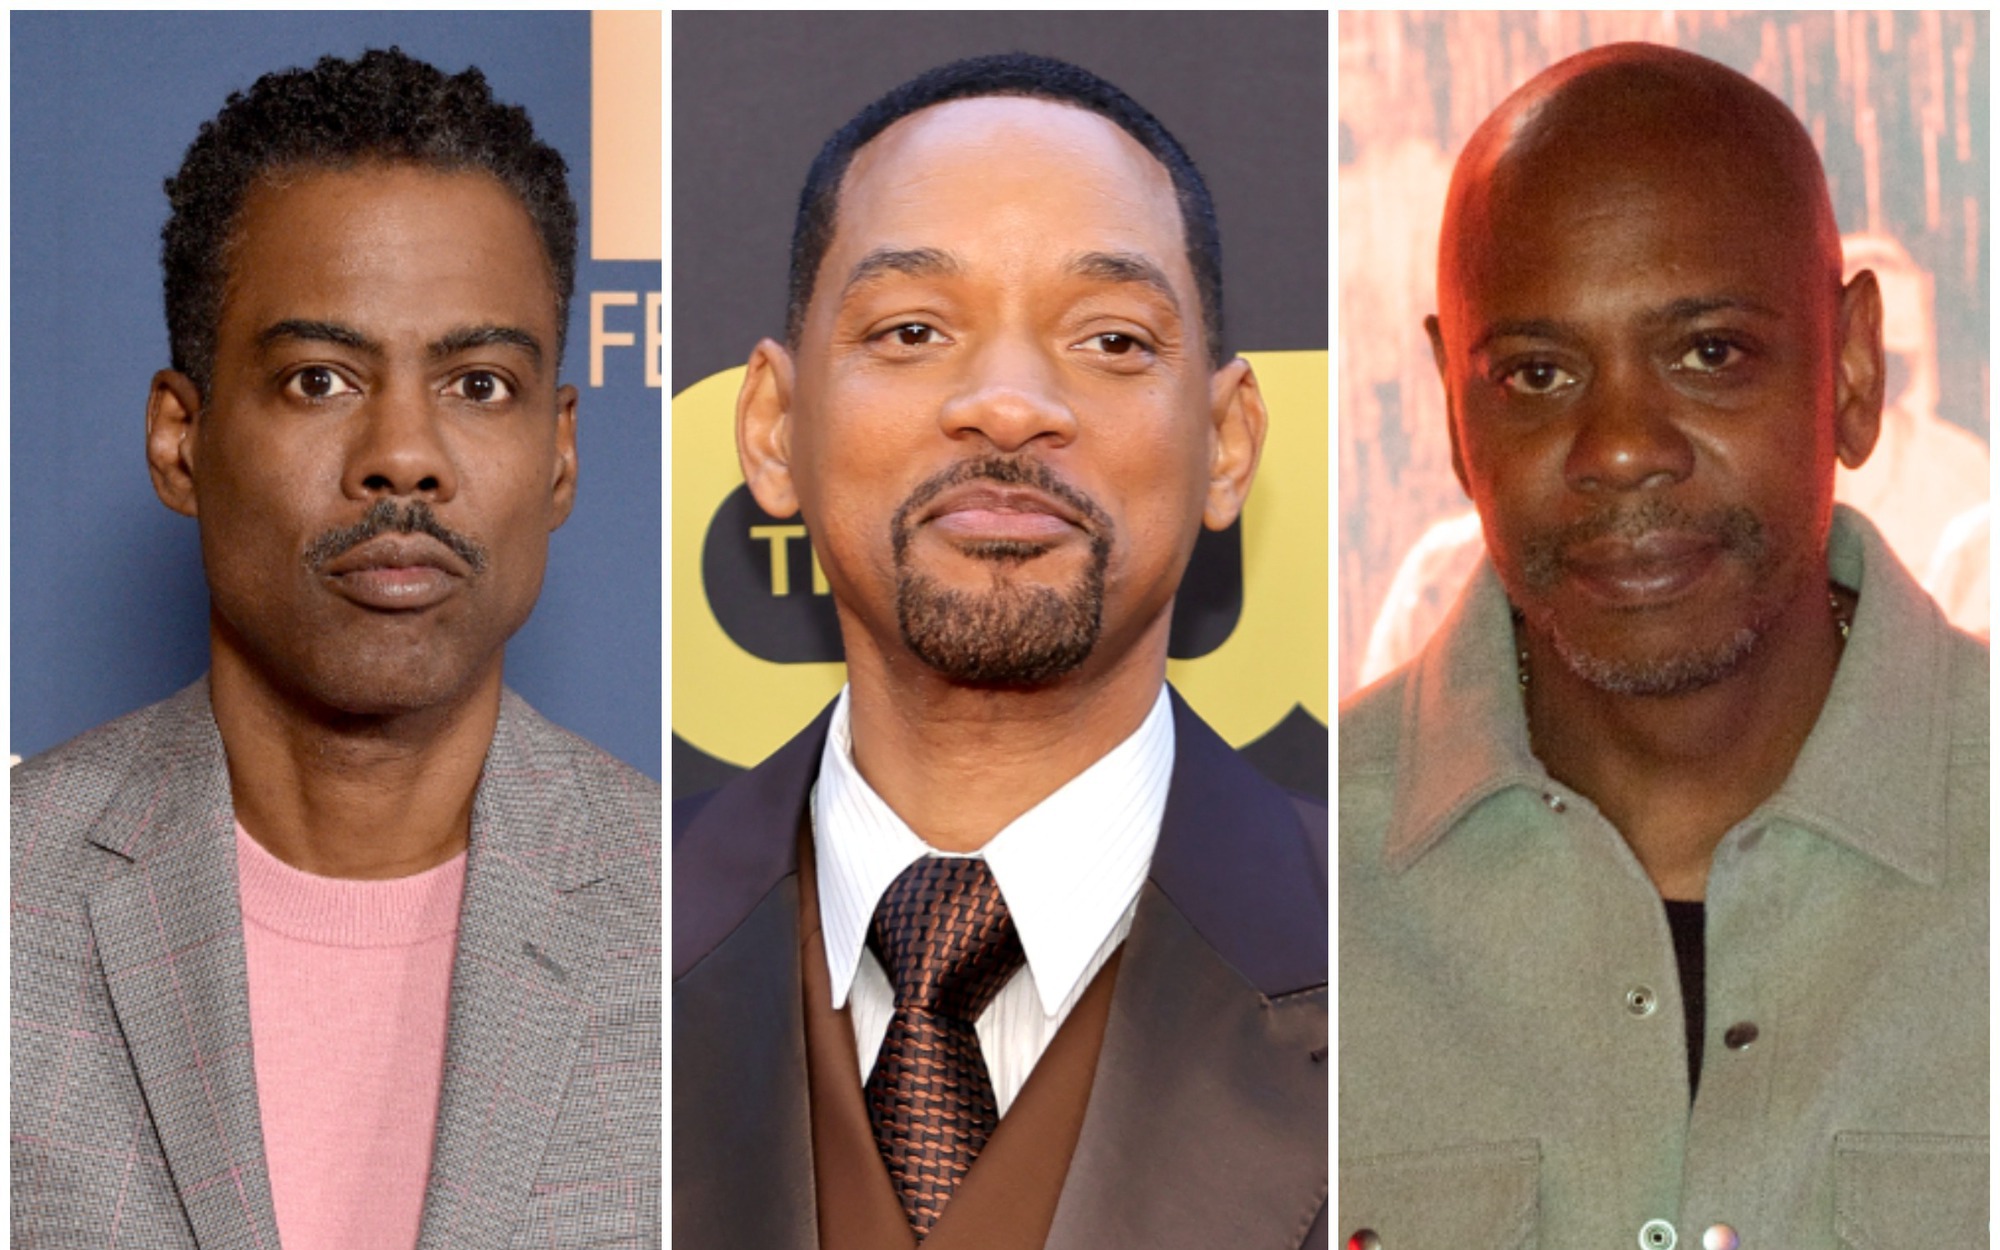 Chris Rock “coffee” Will Smith for the first time after the slap at the Oscars 2022